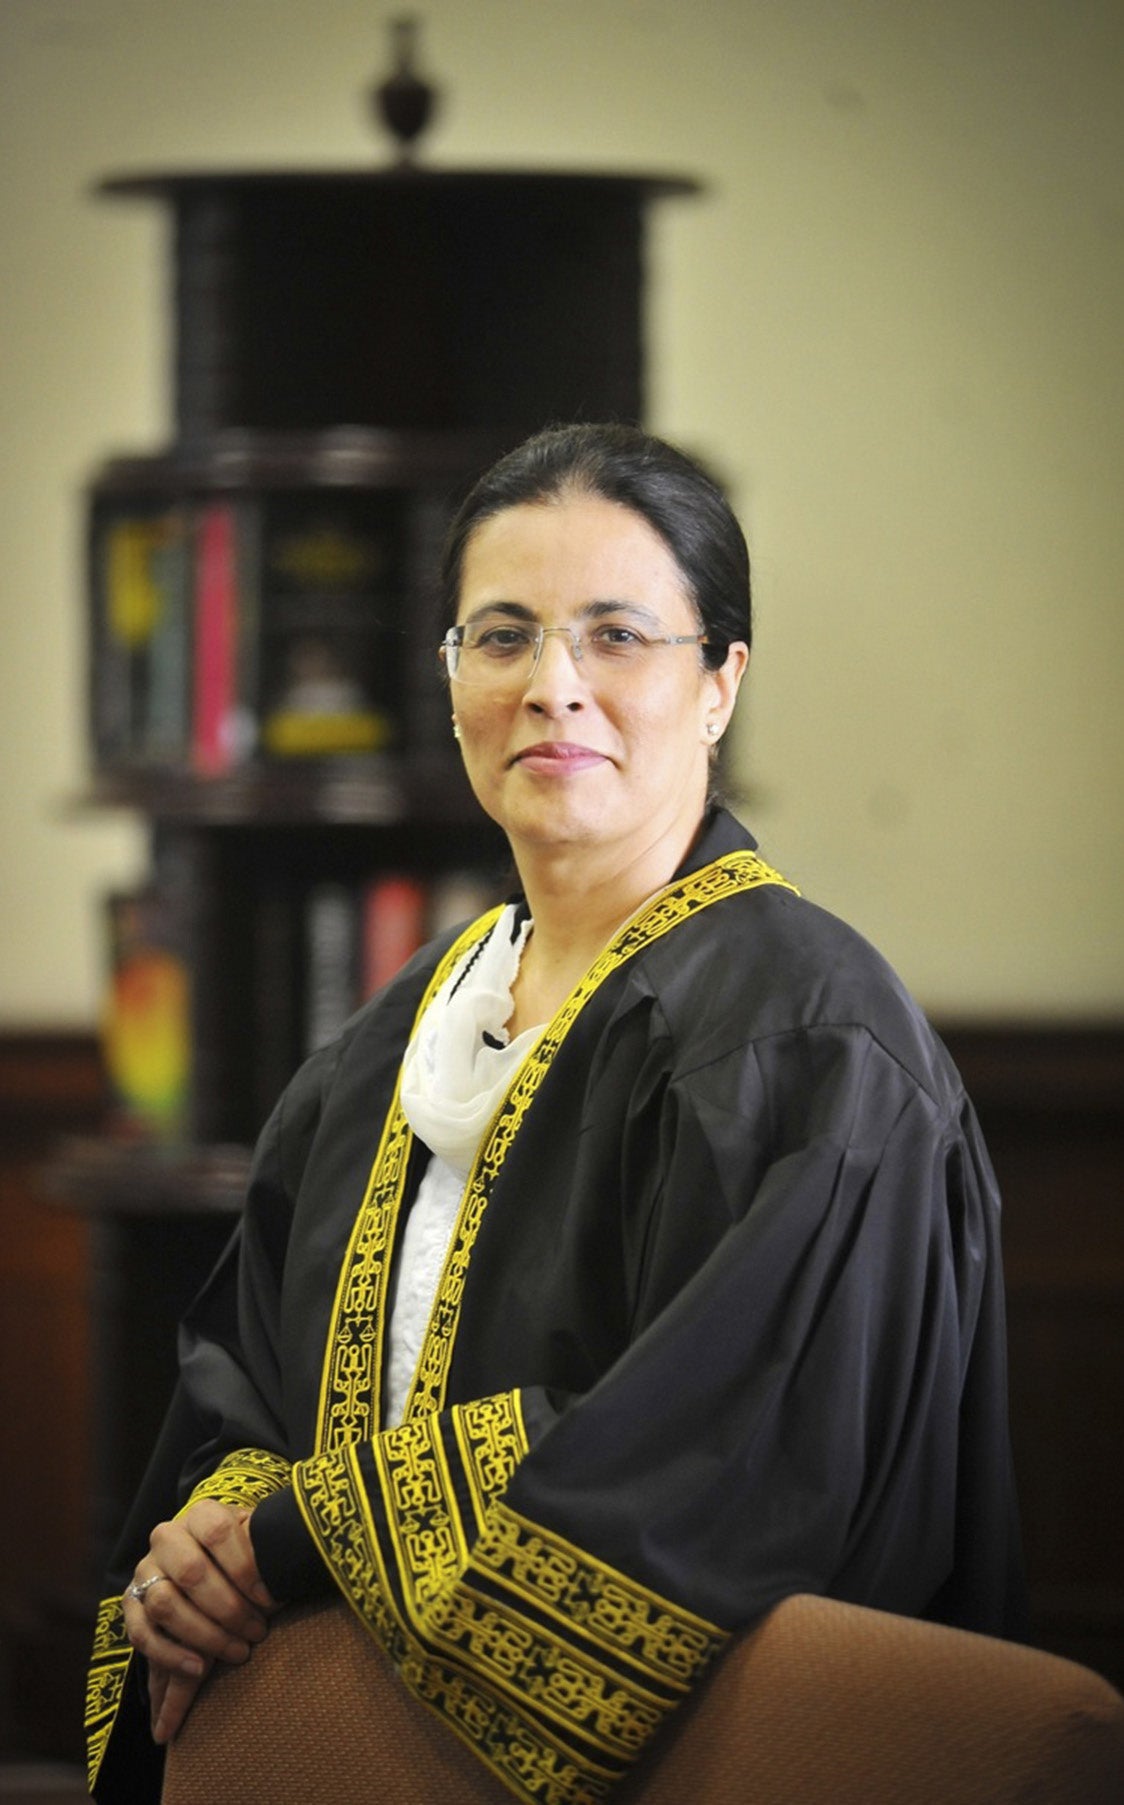 A woman in a black robe with yellow embroidered trim poses for a portrait